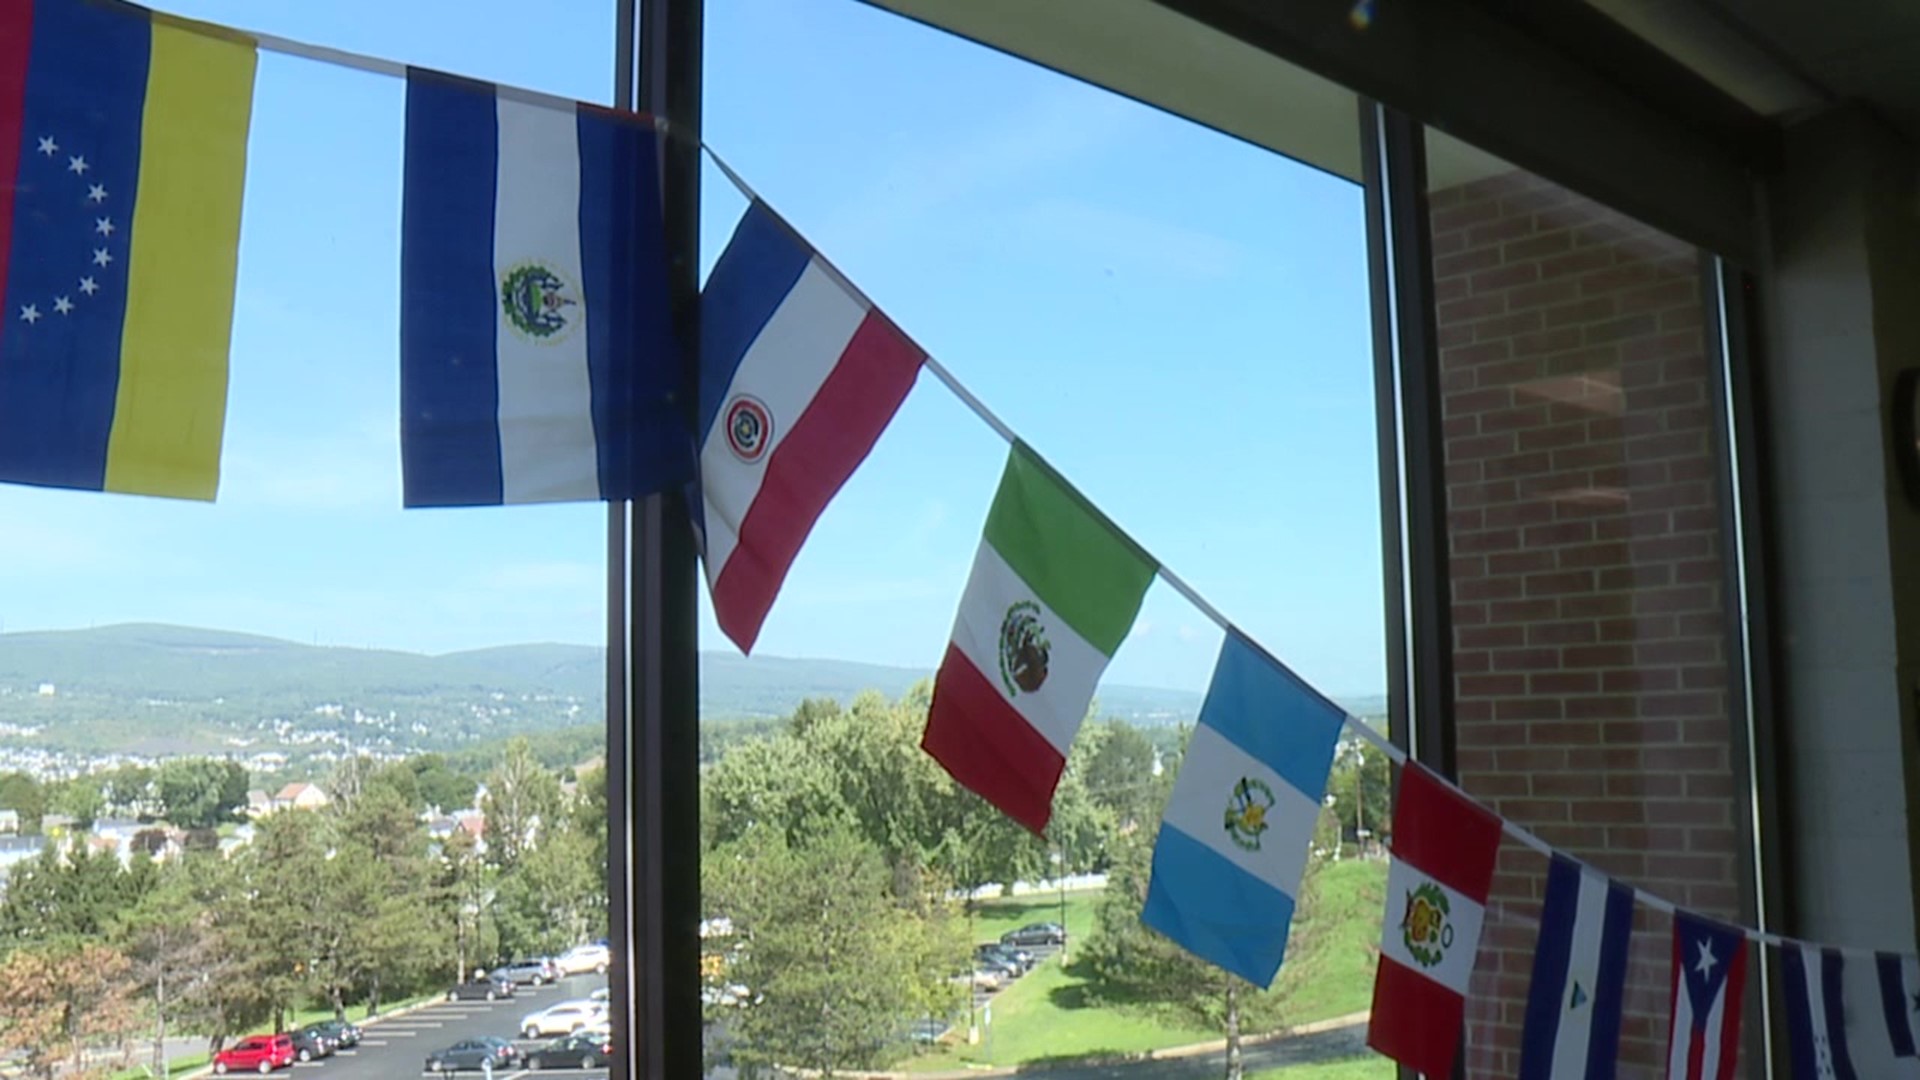 Newswatch 16's Courtney Harrison spoke with students and faculty from two of those schools about the events and the growing Hispanic student population.